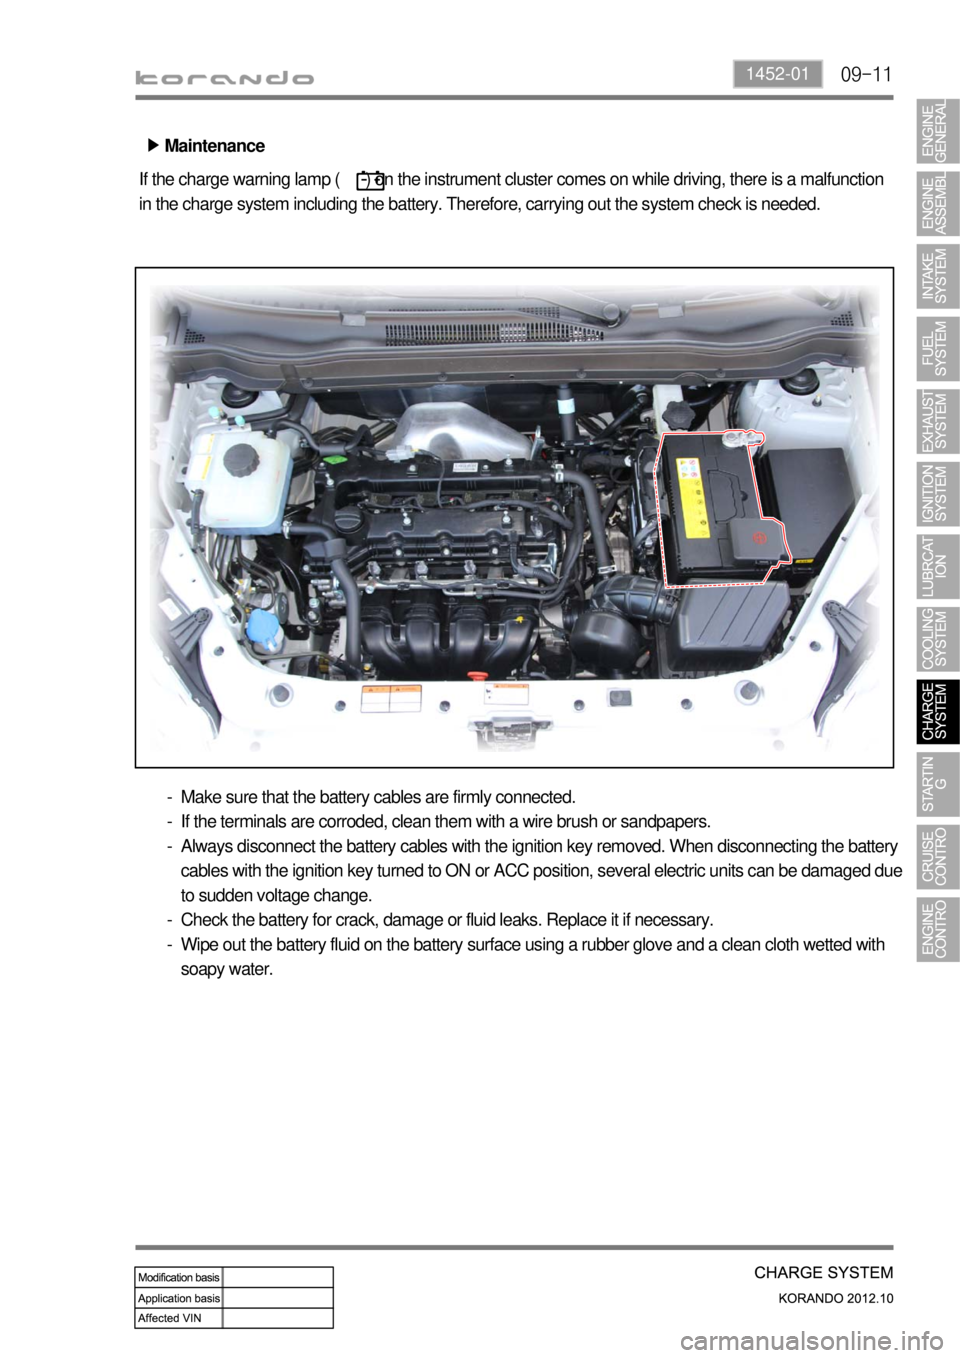 SSANGYONG KORANDO 2012  Service Manual 09-111452-01
Maintenance ▶
If the charge warning lamp (      ) on the instrument cluster comes on while driving, there is a malfunction 
in the charge system including the battery. Therefore, carryi